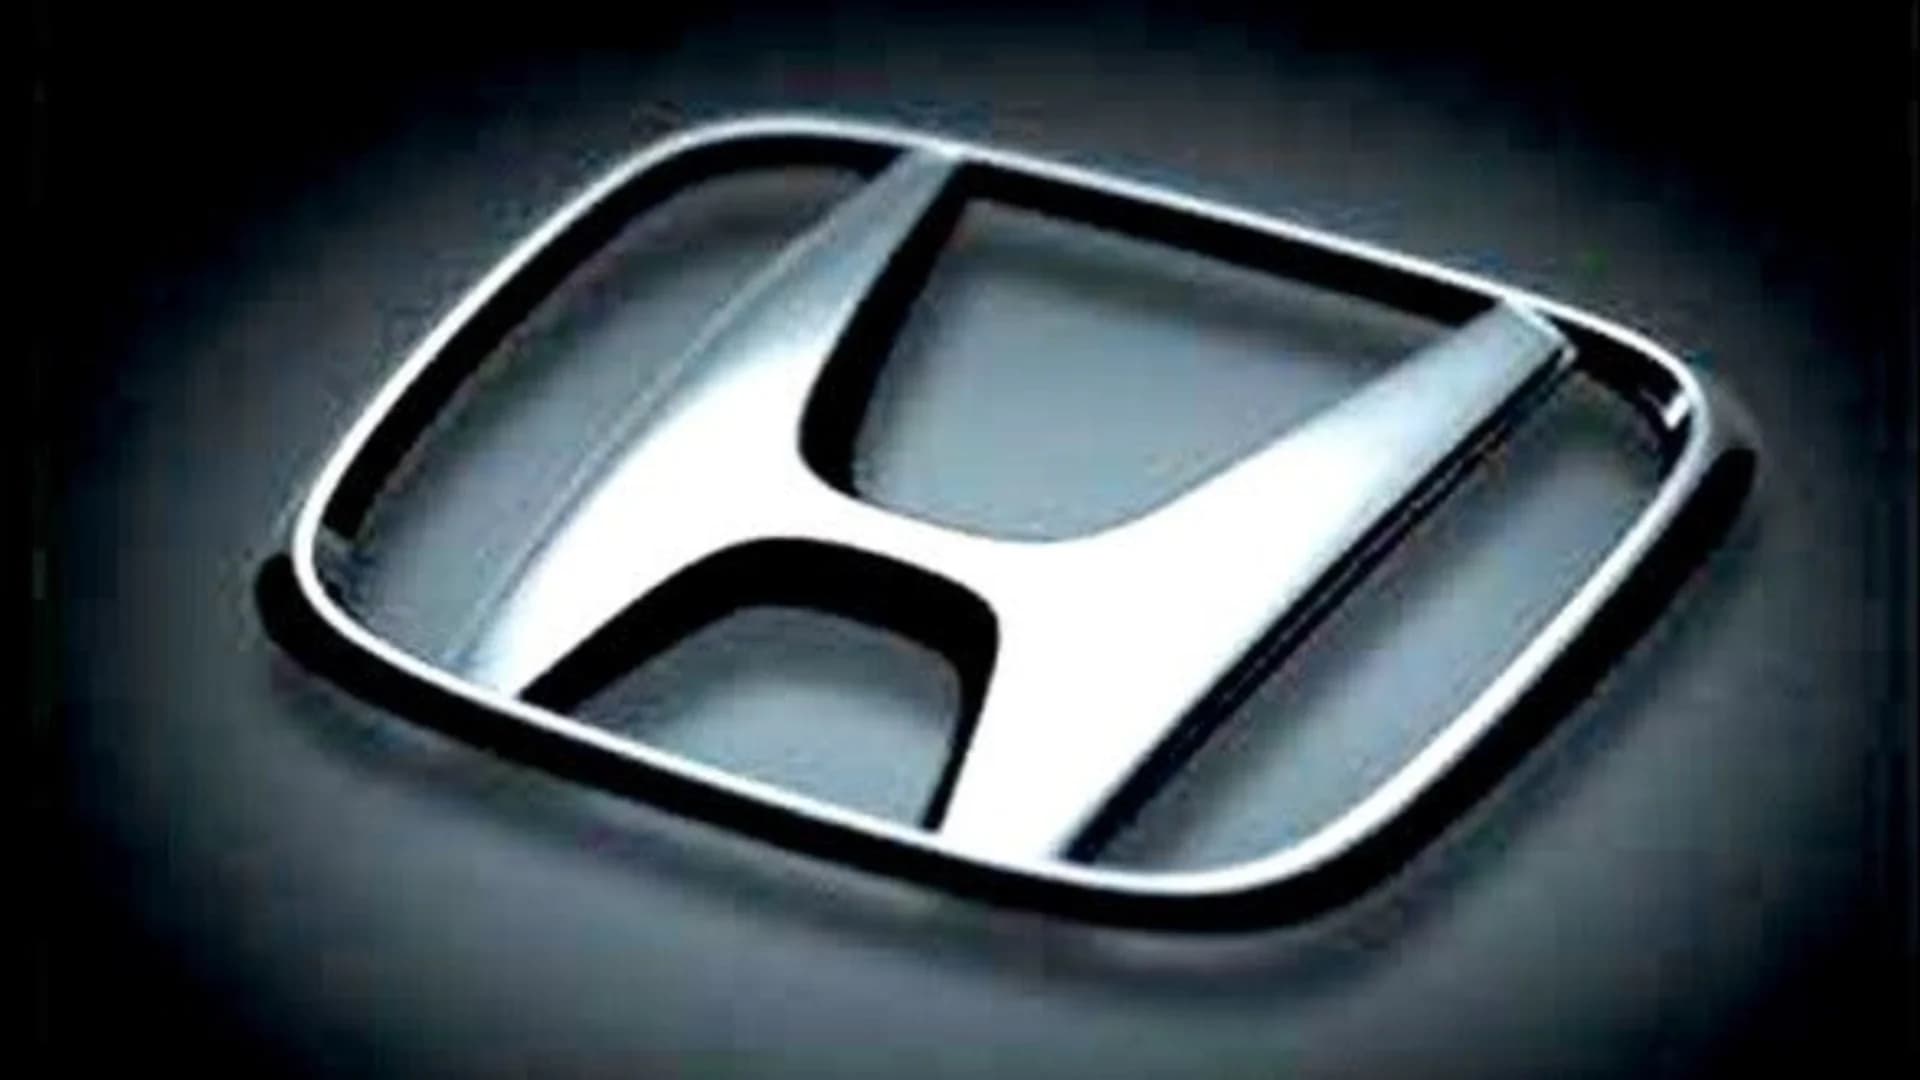 Honda recalls 241,000 minivans to fix wiring that could be fire risk